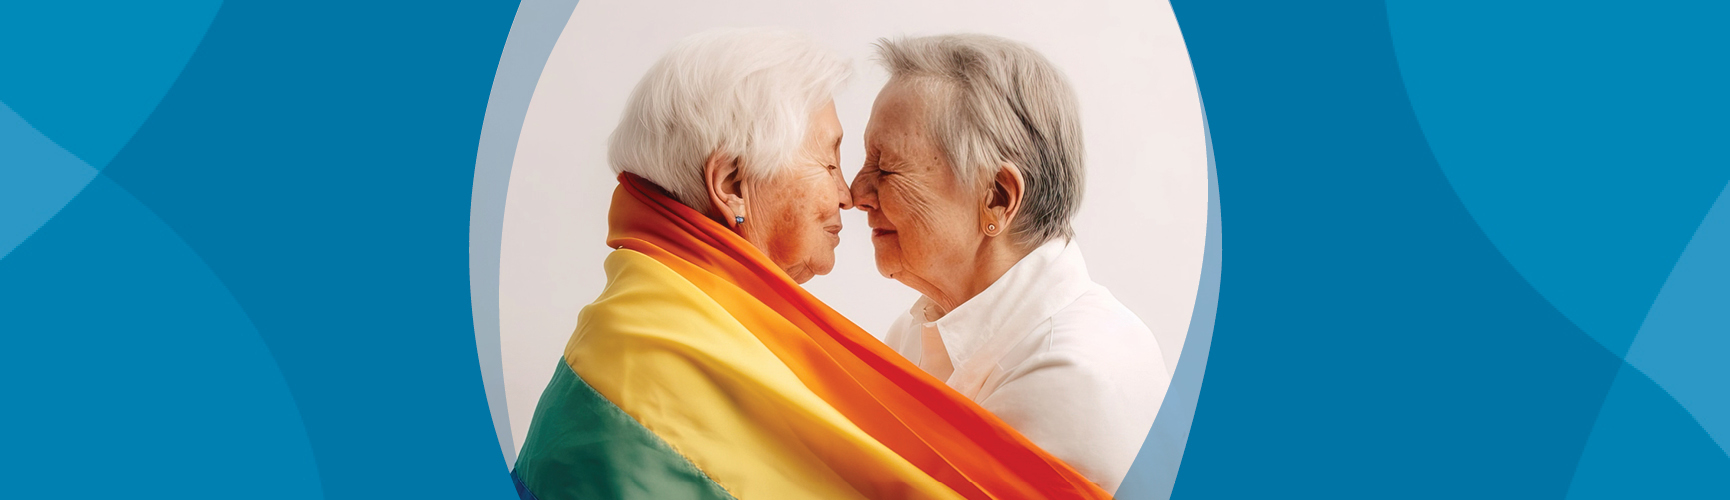 Two older women face-to-face with noses touching. One woman is draped in a rainbow flag.